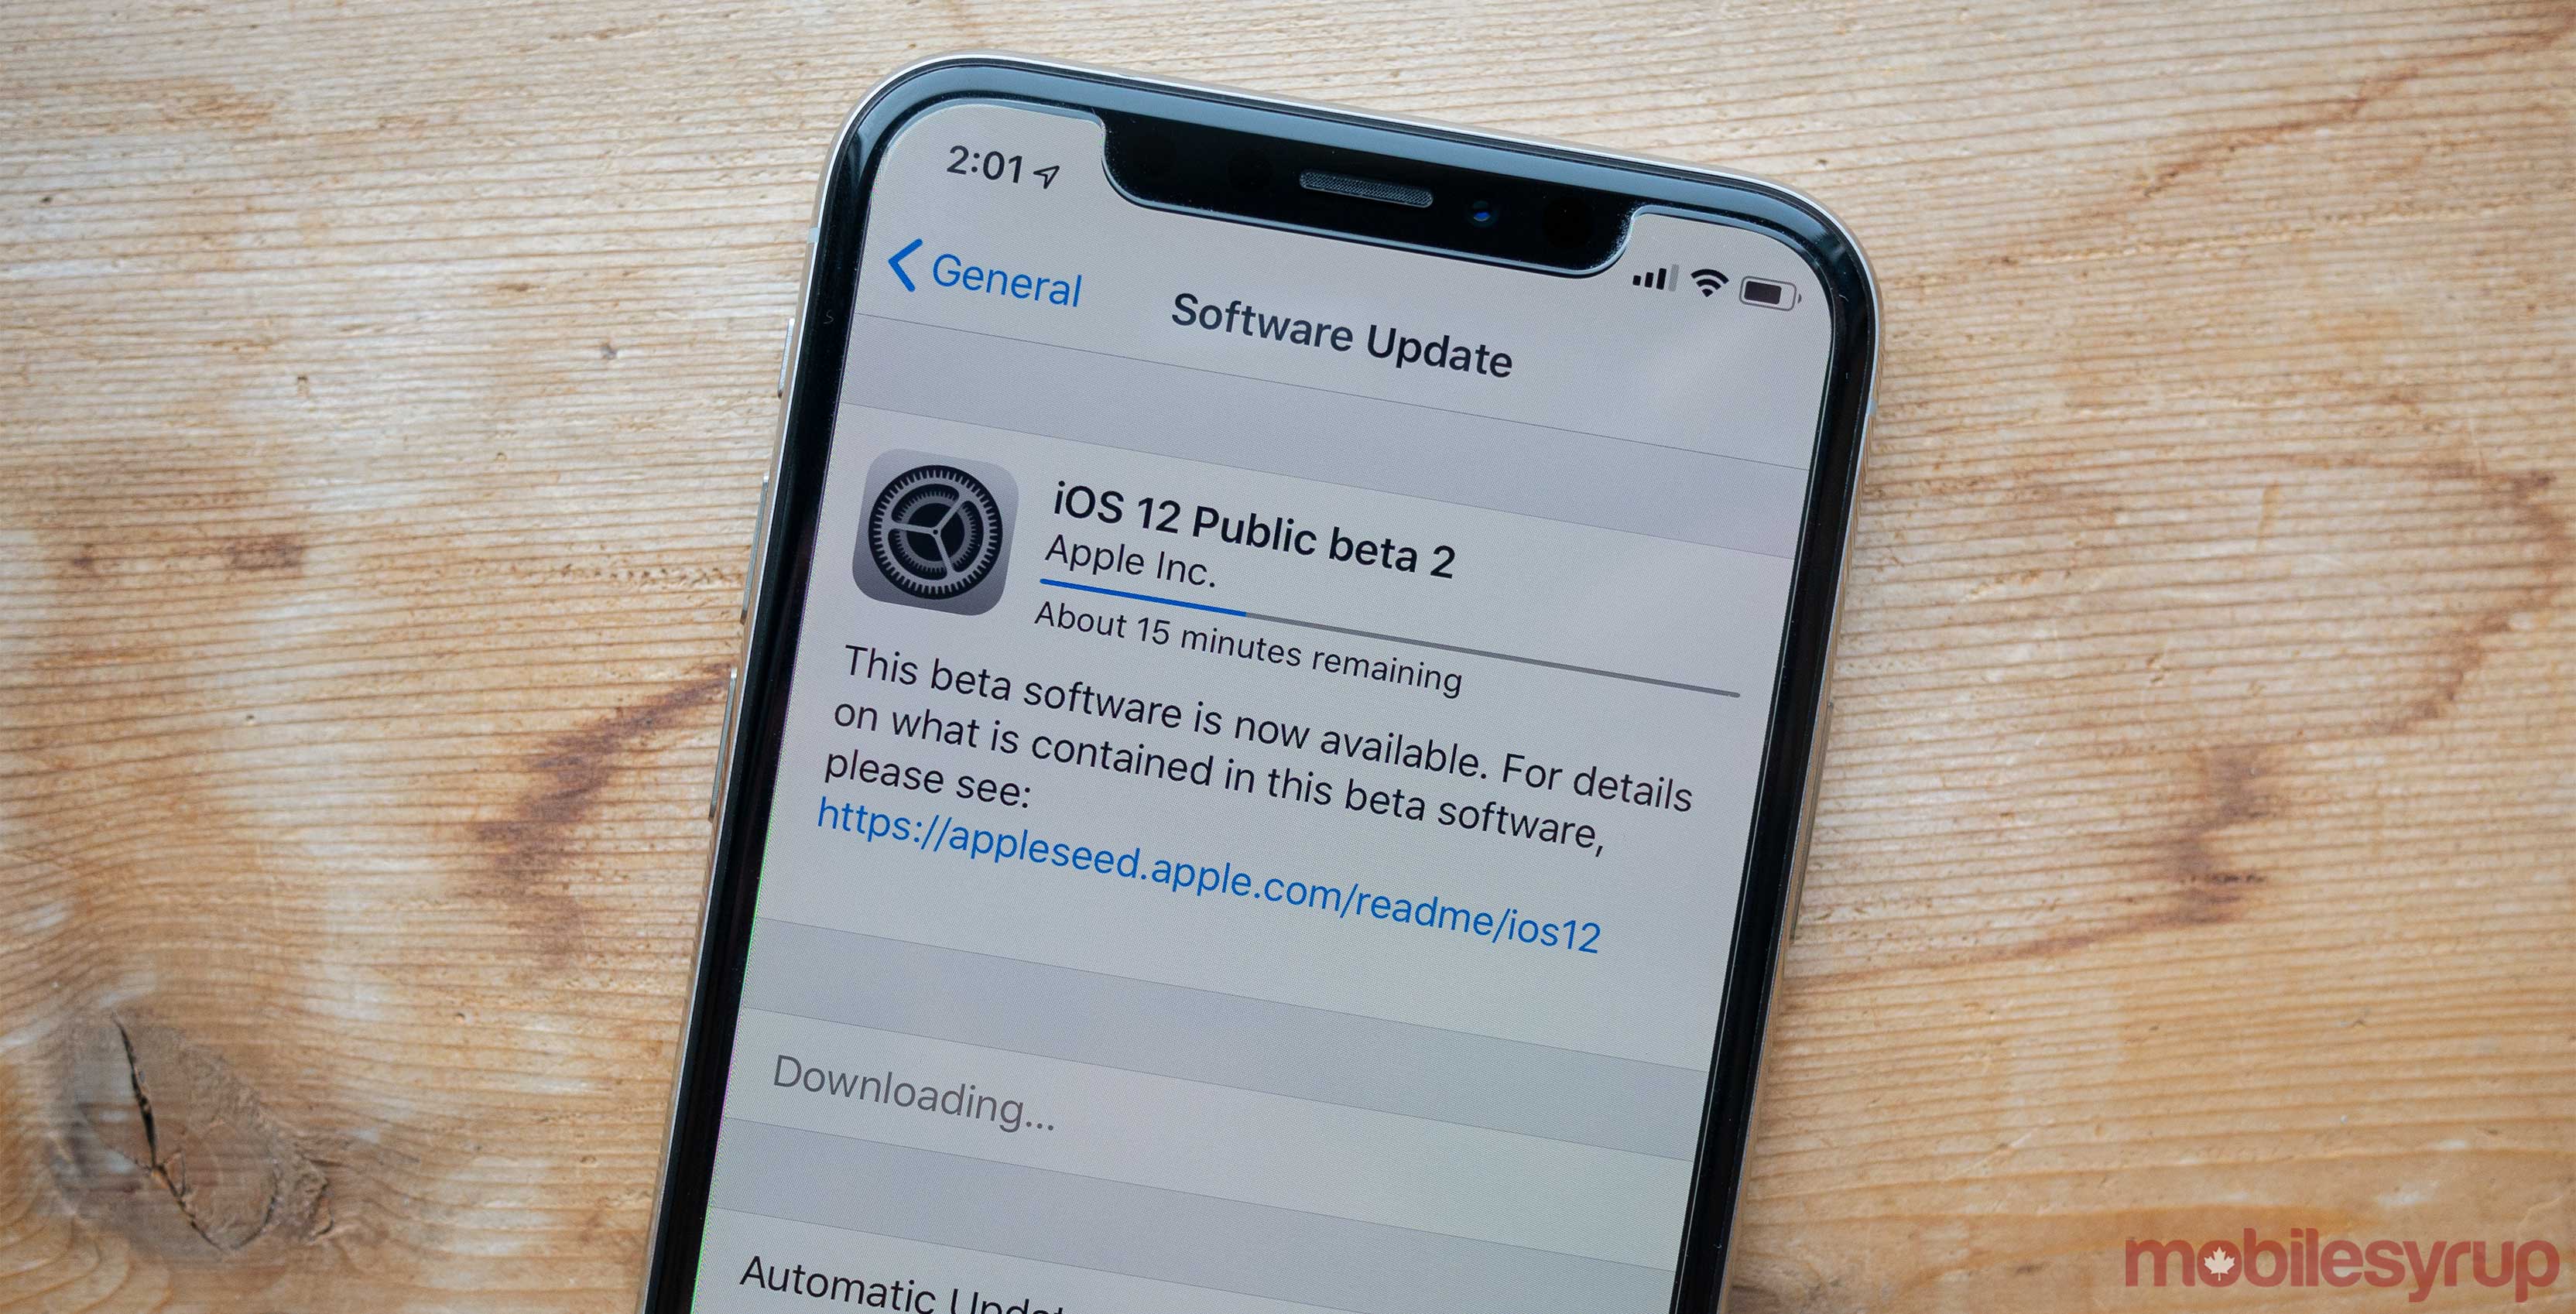 Apple Announces Ios 12 Will Launch On September 17